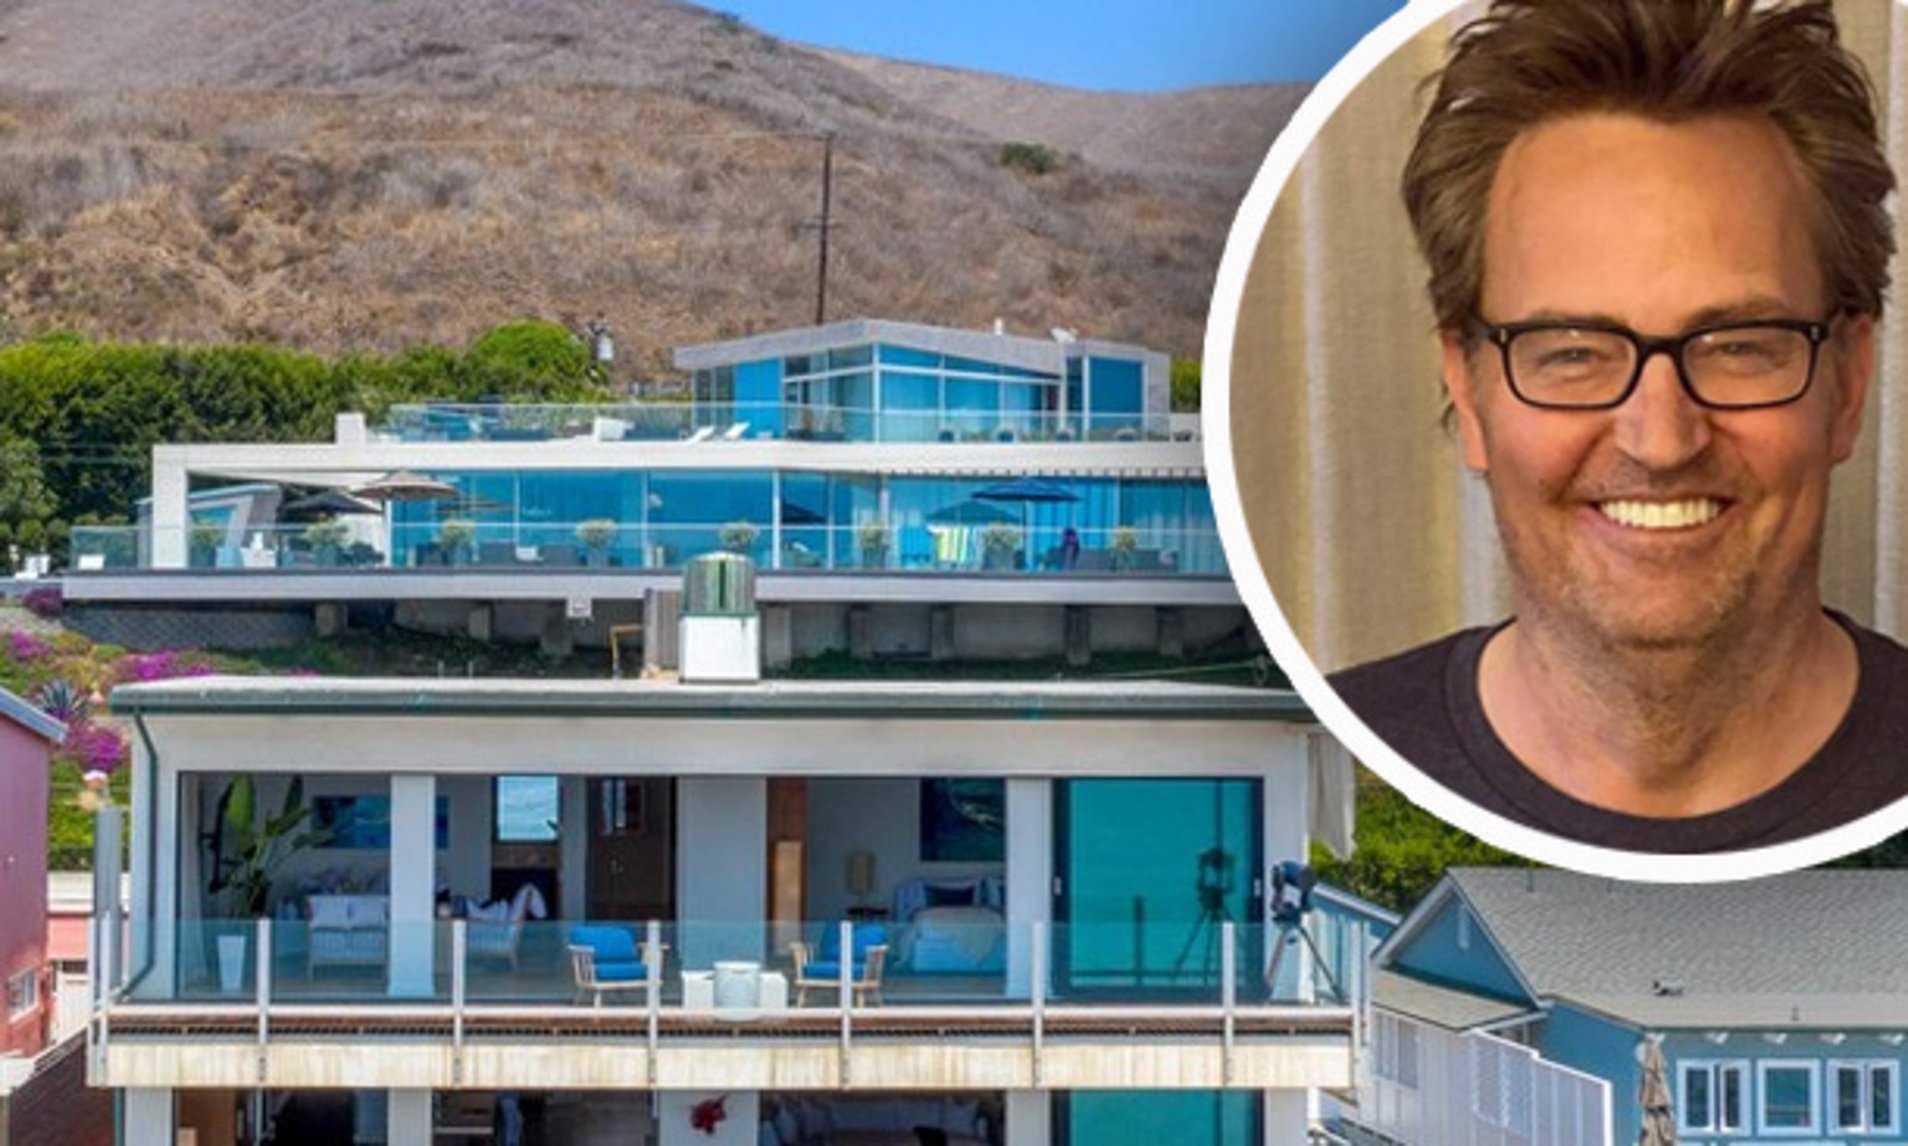 Matthew Perry sells off his beachfront Malibu bachelor pad for $13.1 million... after putting it on the market for $14.95 million